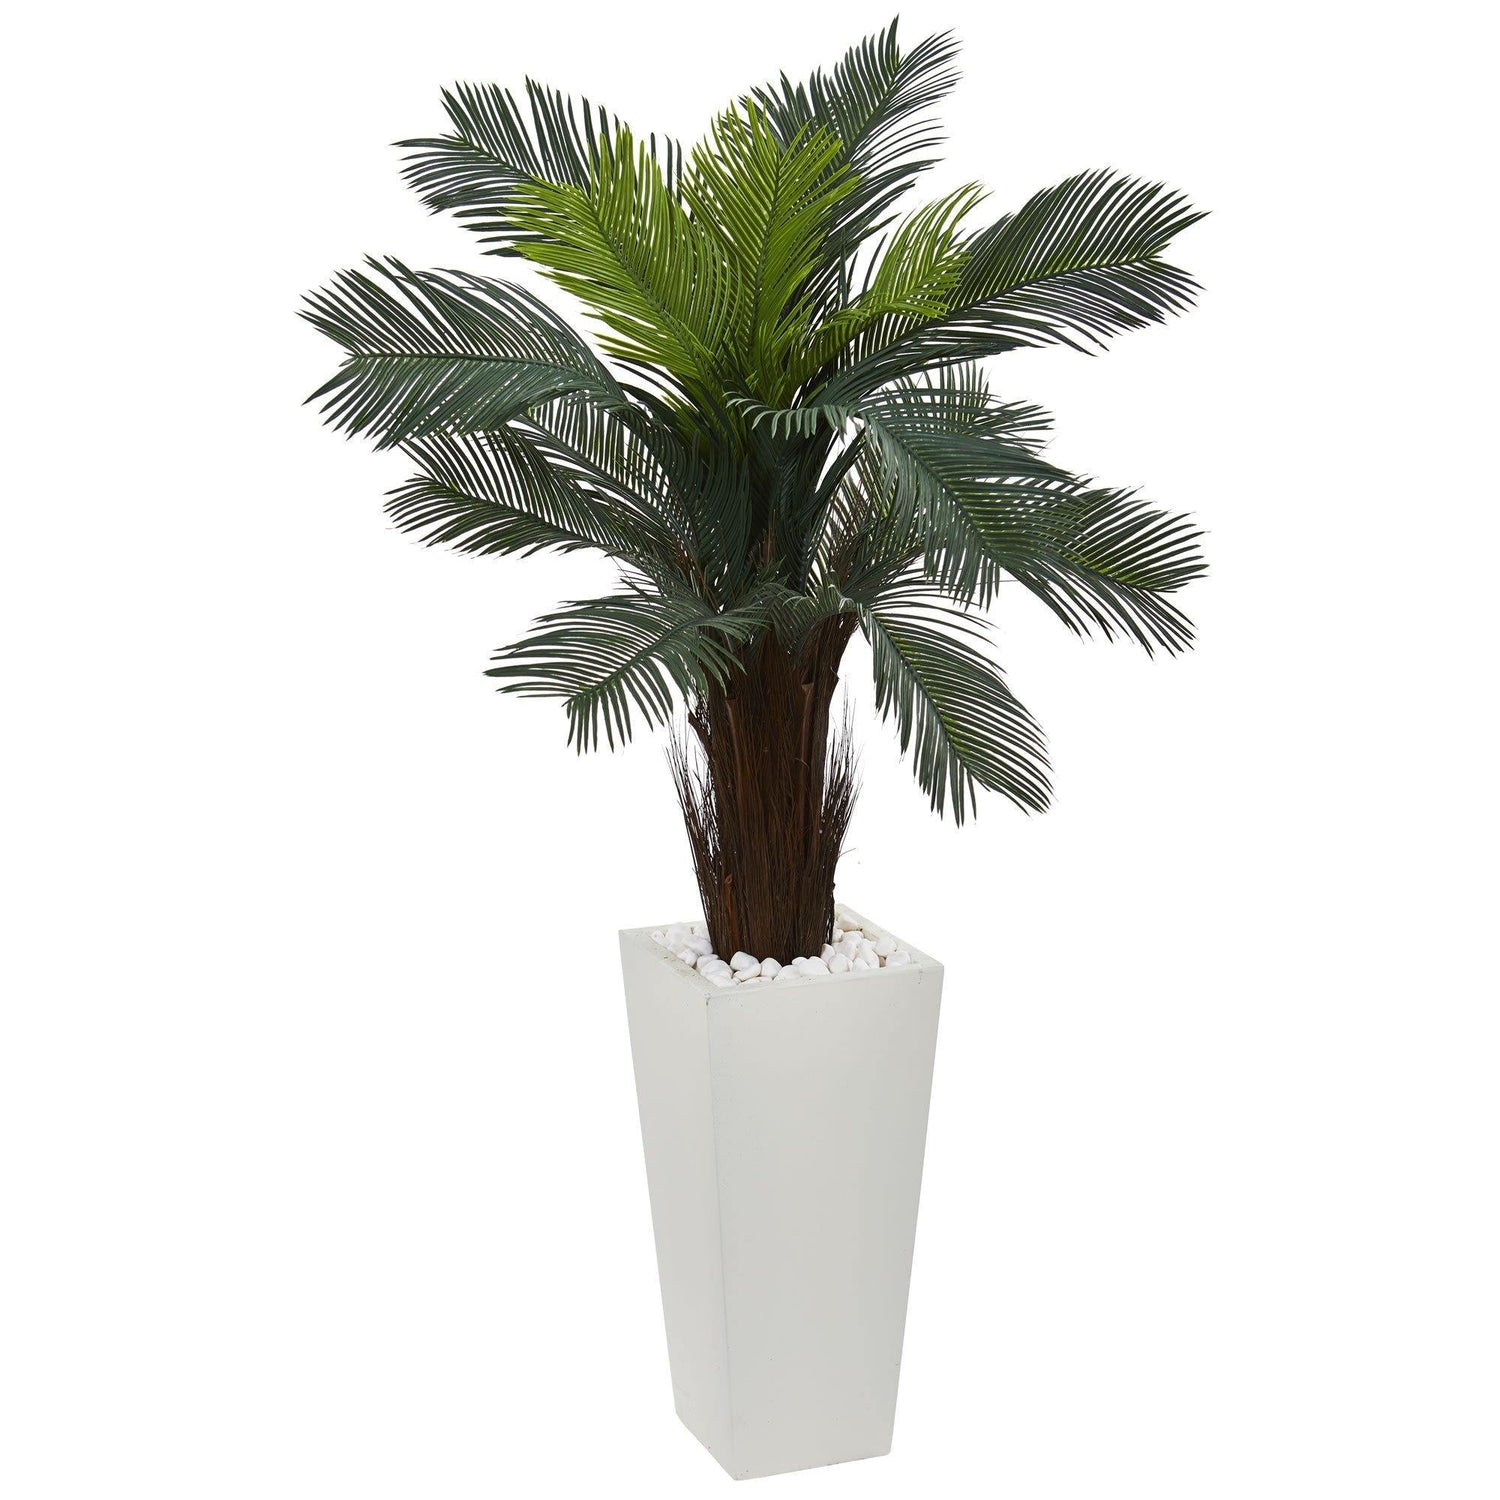 4.5’ Cycas Artificial Plant in White Tower Planter Indoor/Outdoor